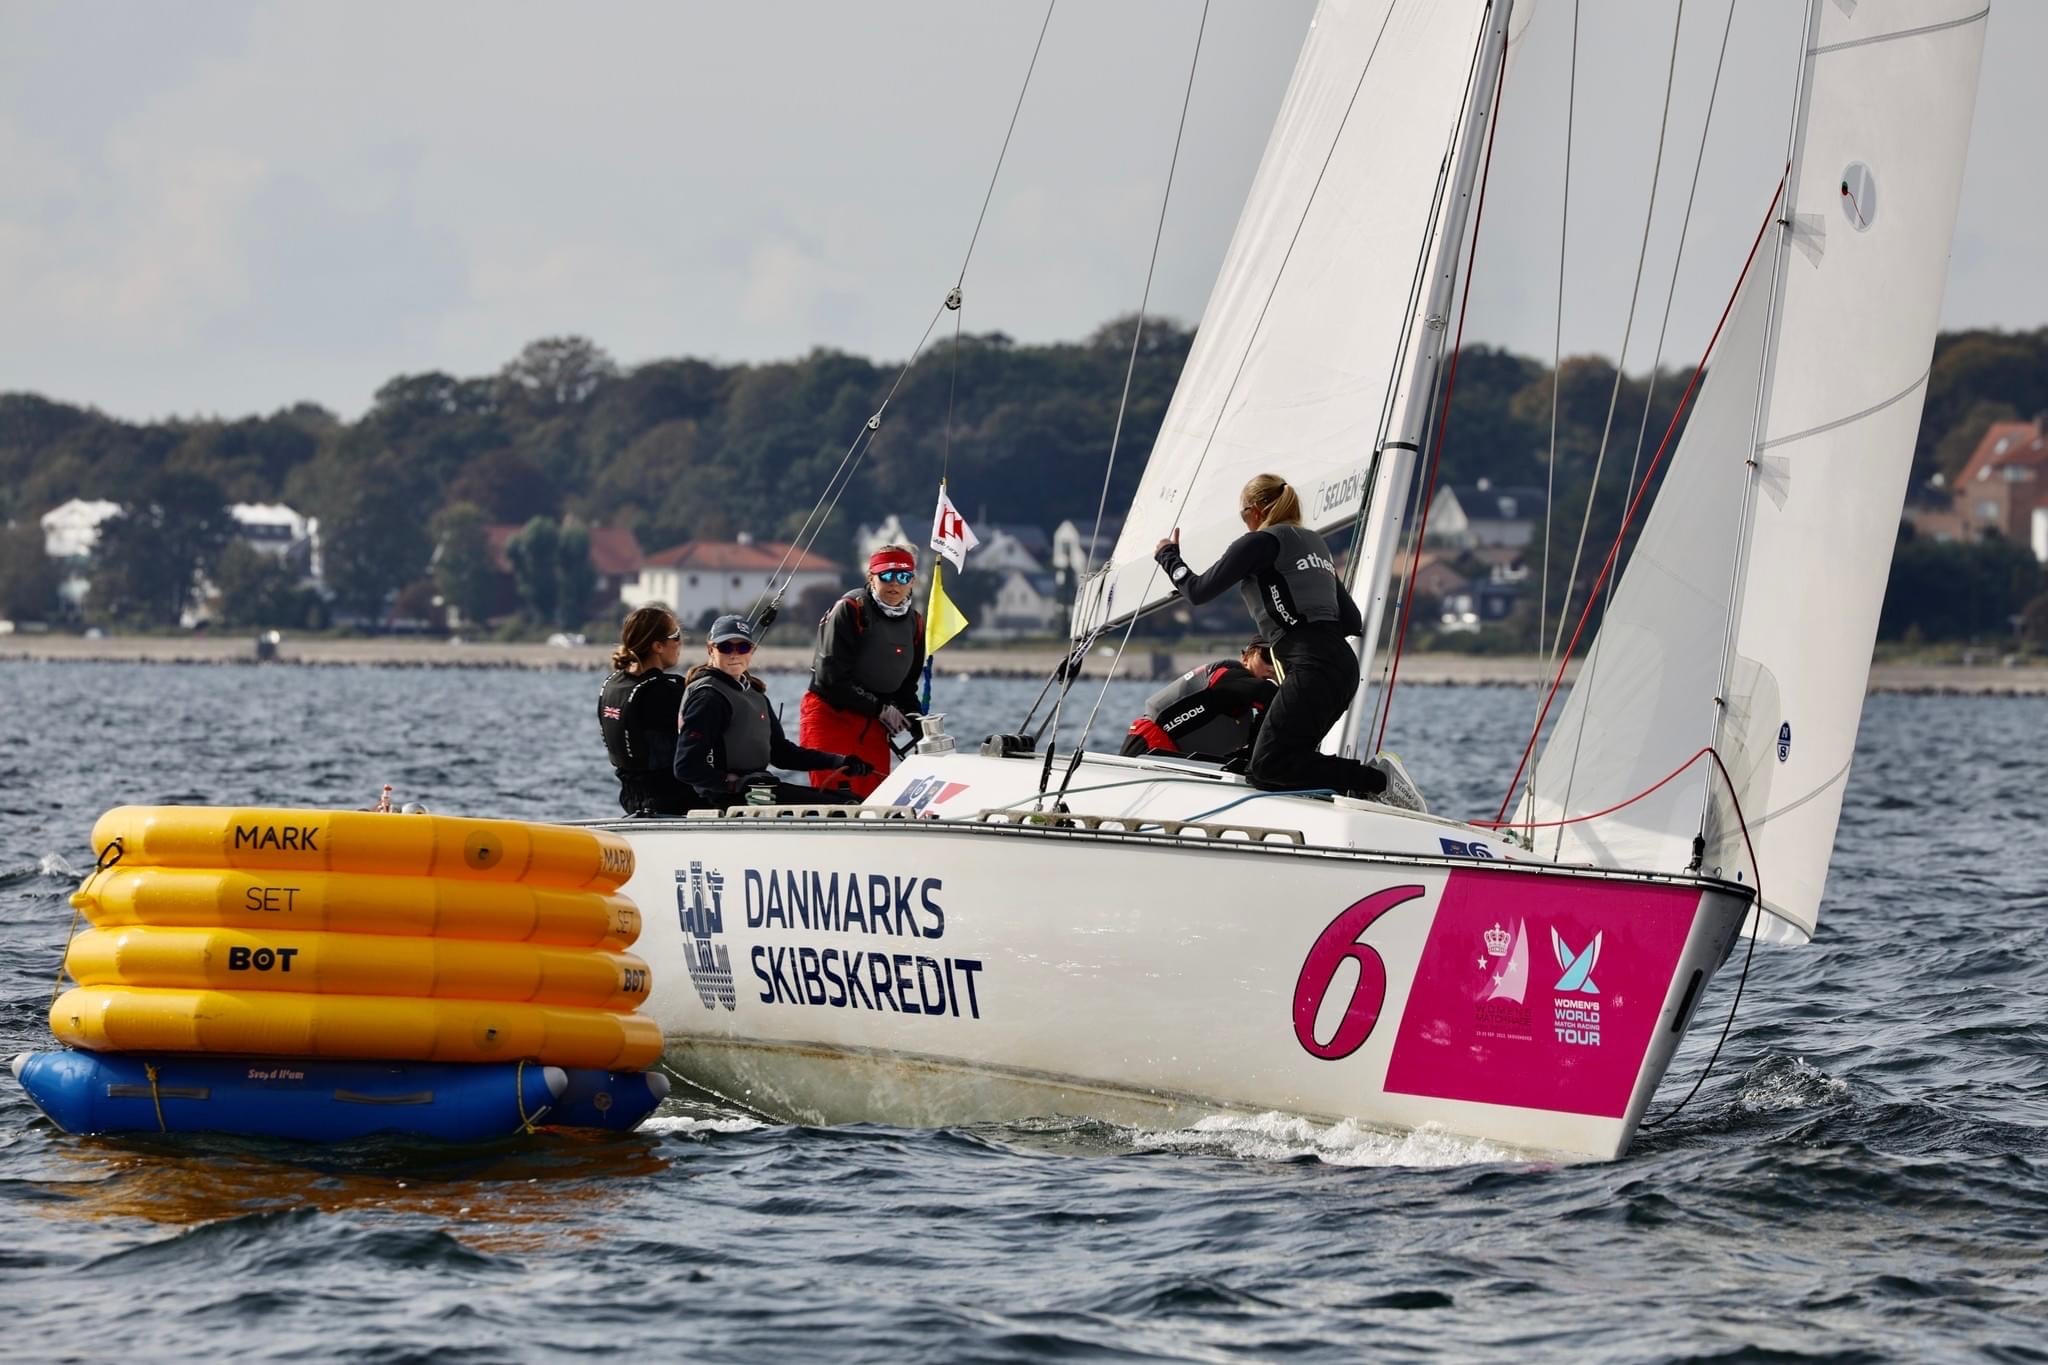 A sailboat rounds a mark in the Women's World Match Racing Tour